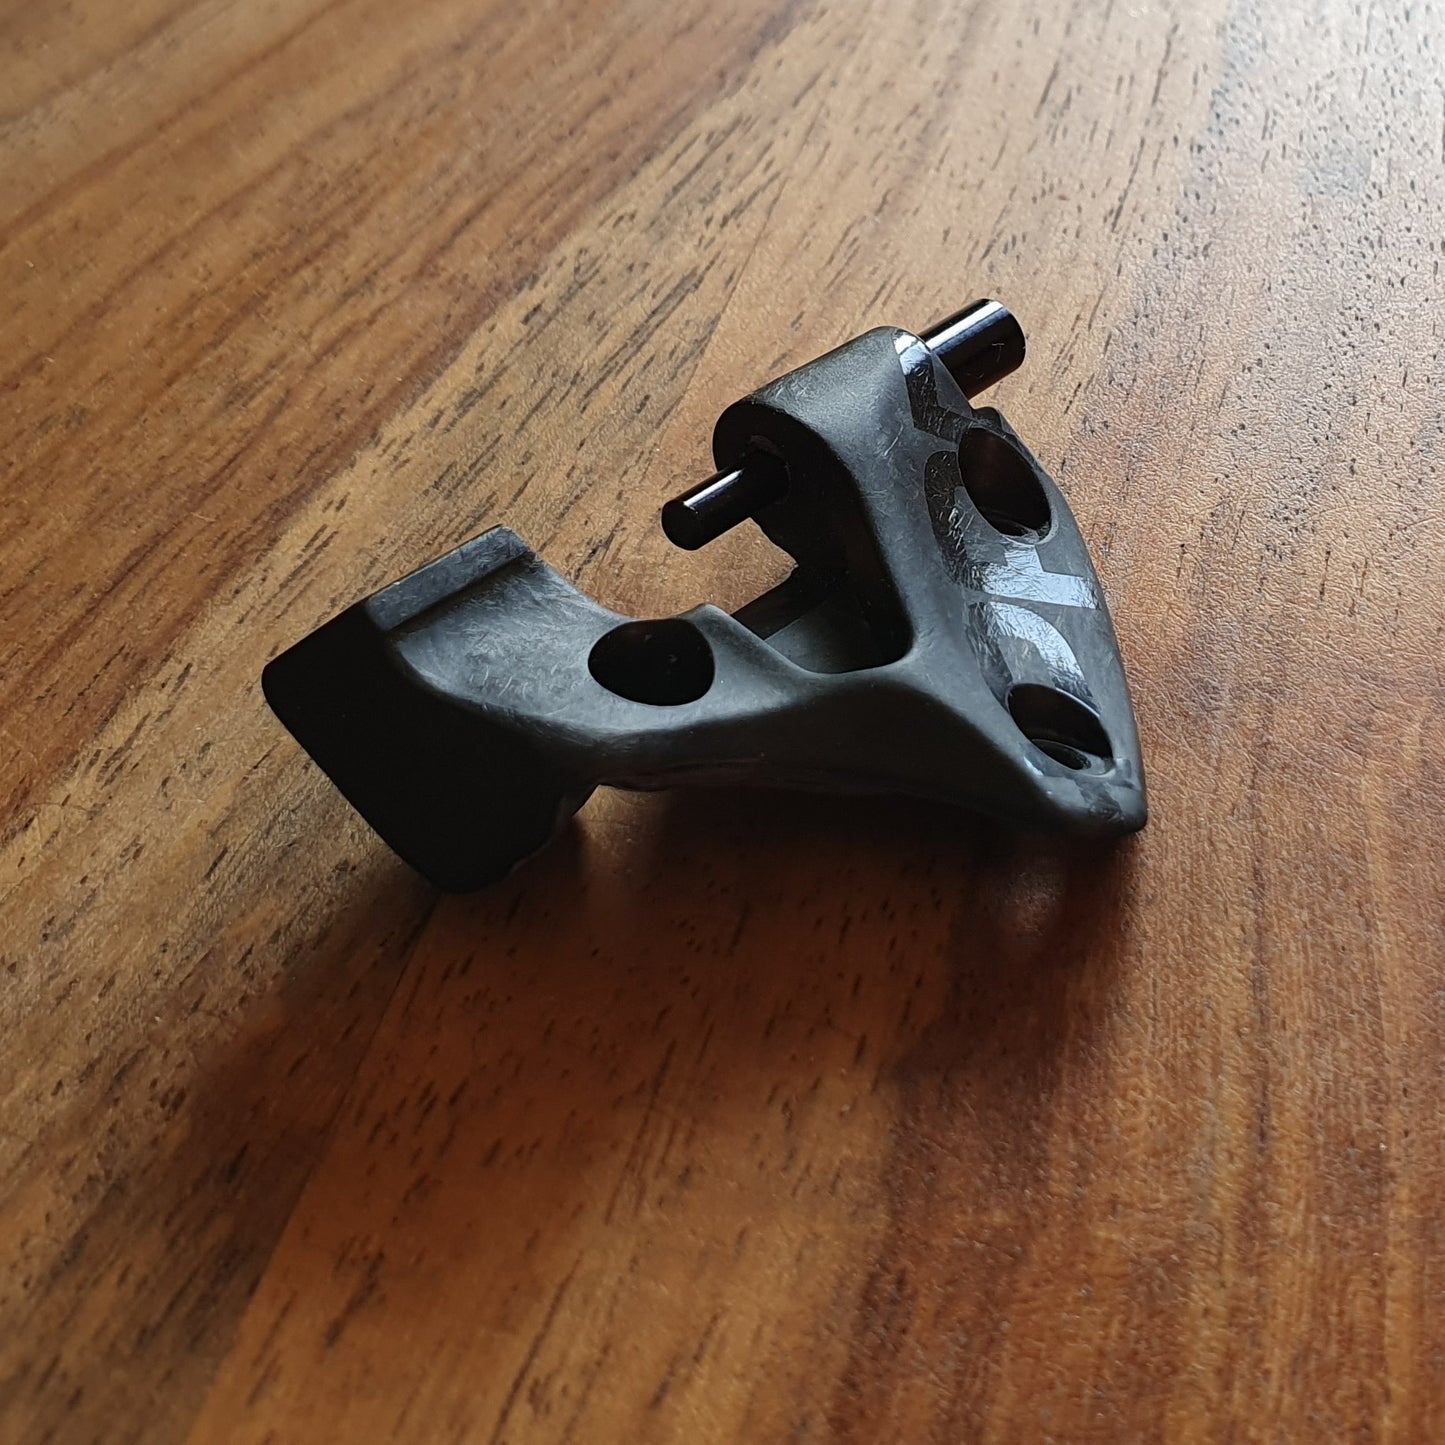 SL body part for sram AXS reverb controller + pin